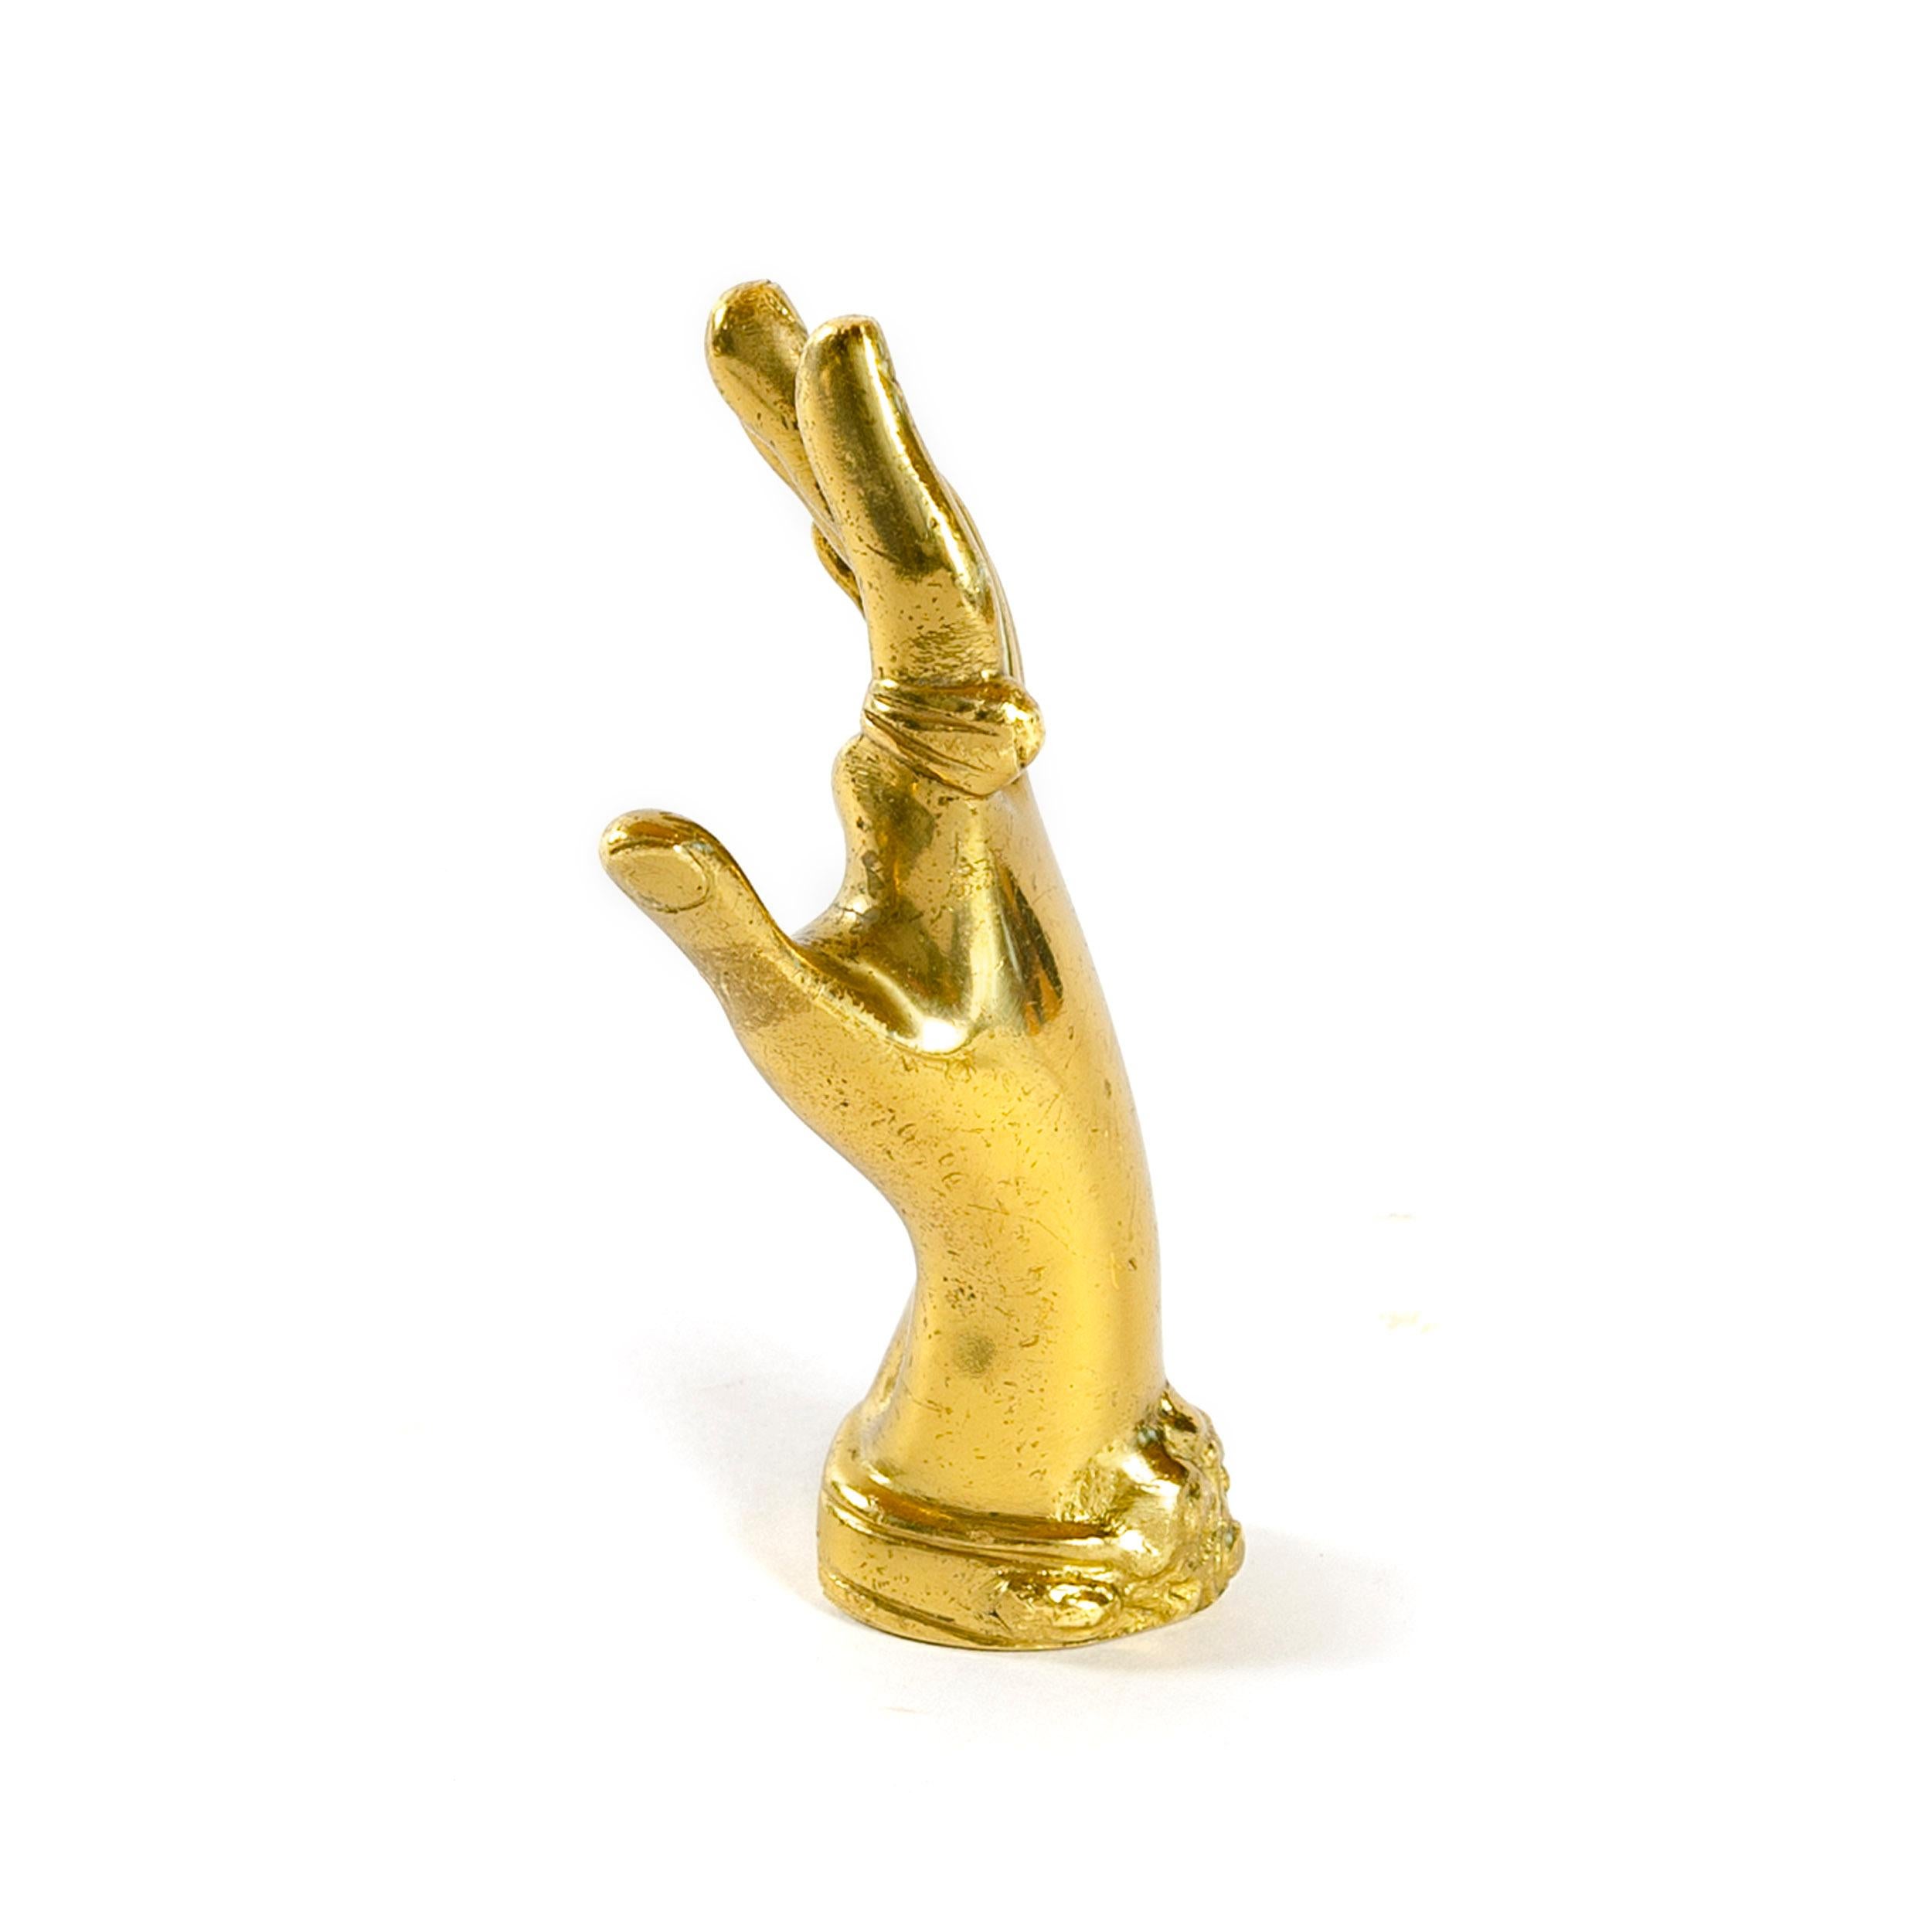 An elegant heavy solid brass 'hand' paperweight.